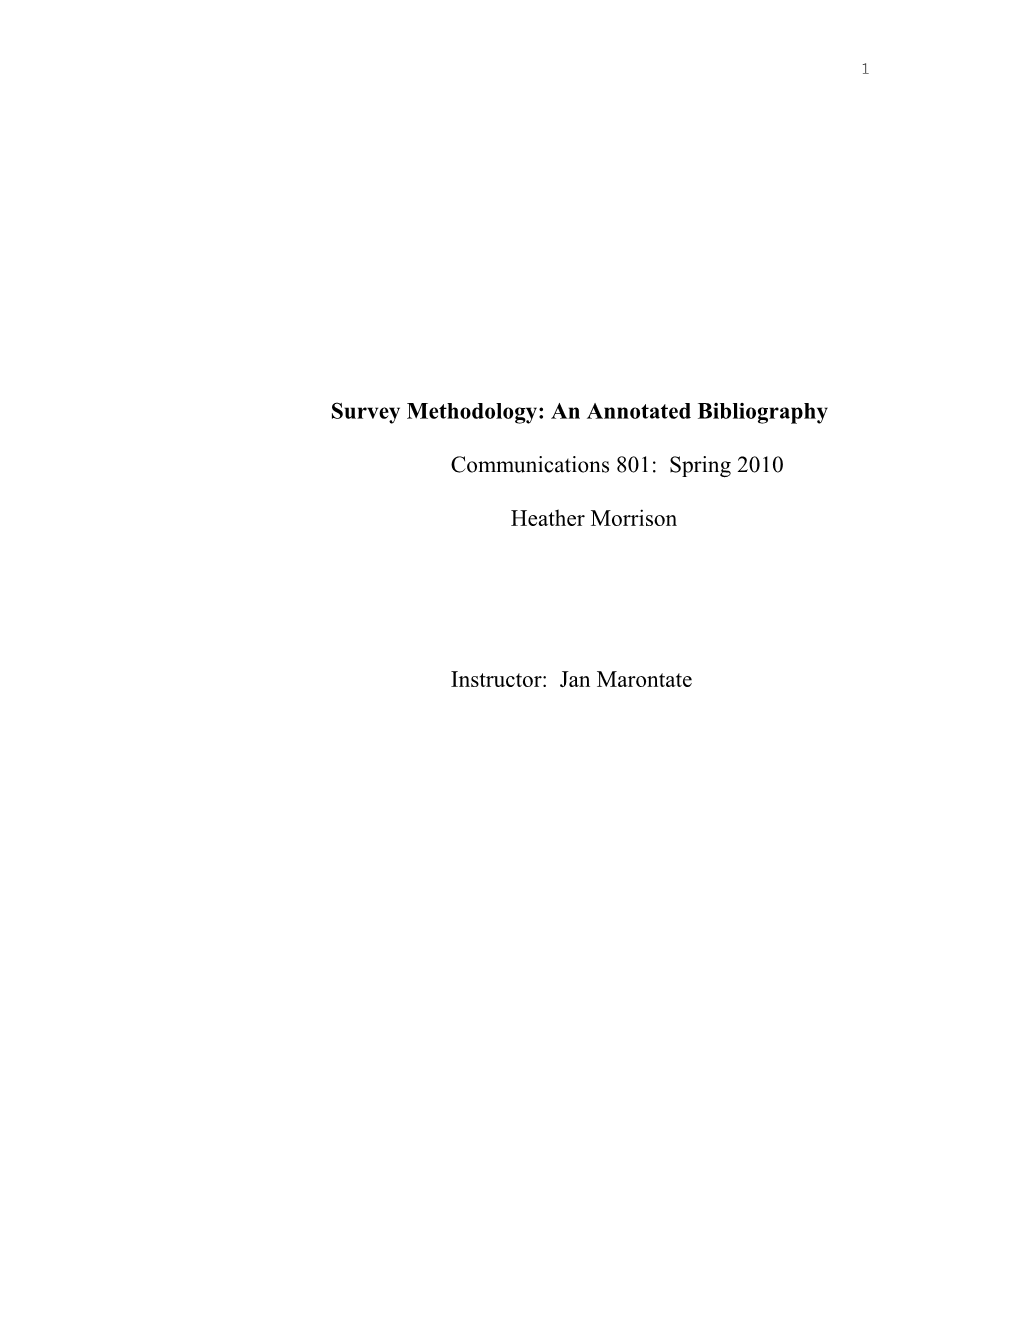 Survey Methodology: an Annotated Bibliography